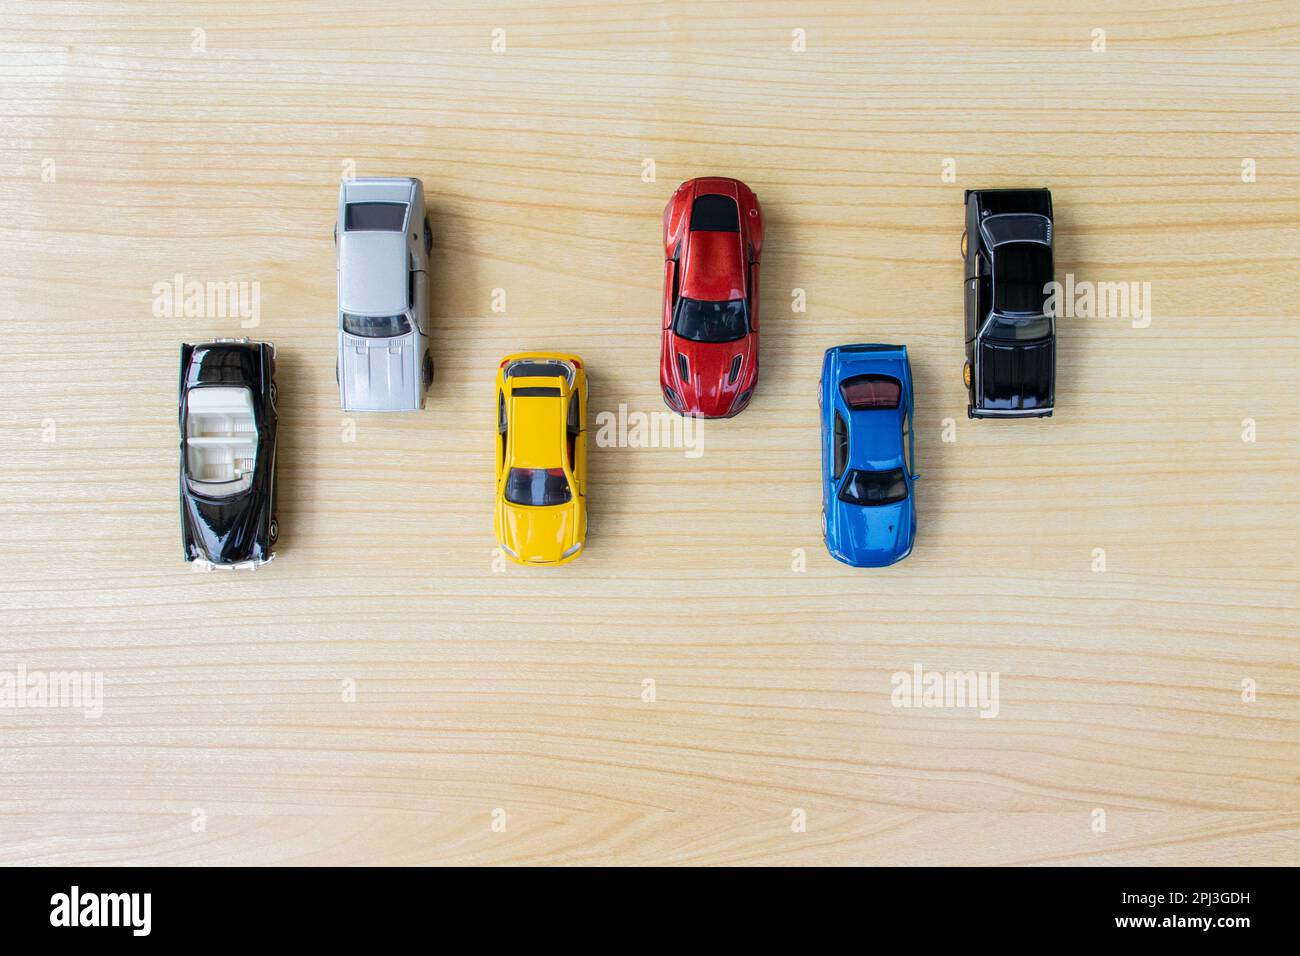 Group of toy cars isolated on wooden background, after some edits. Stock Photo